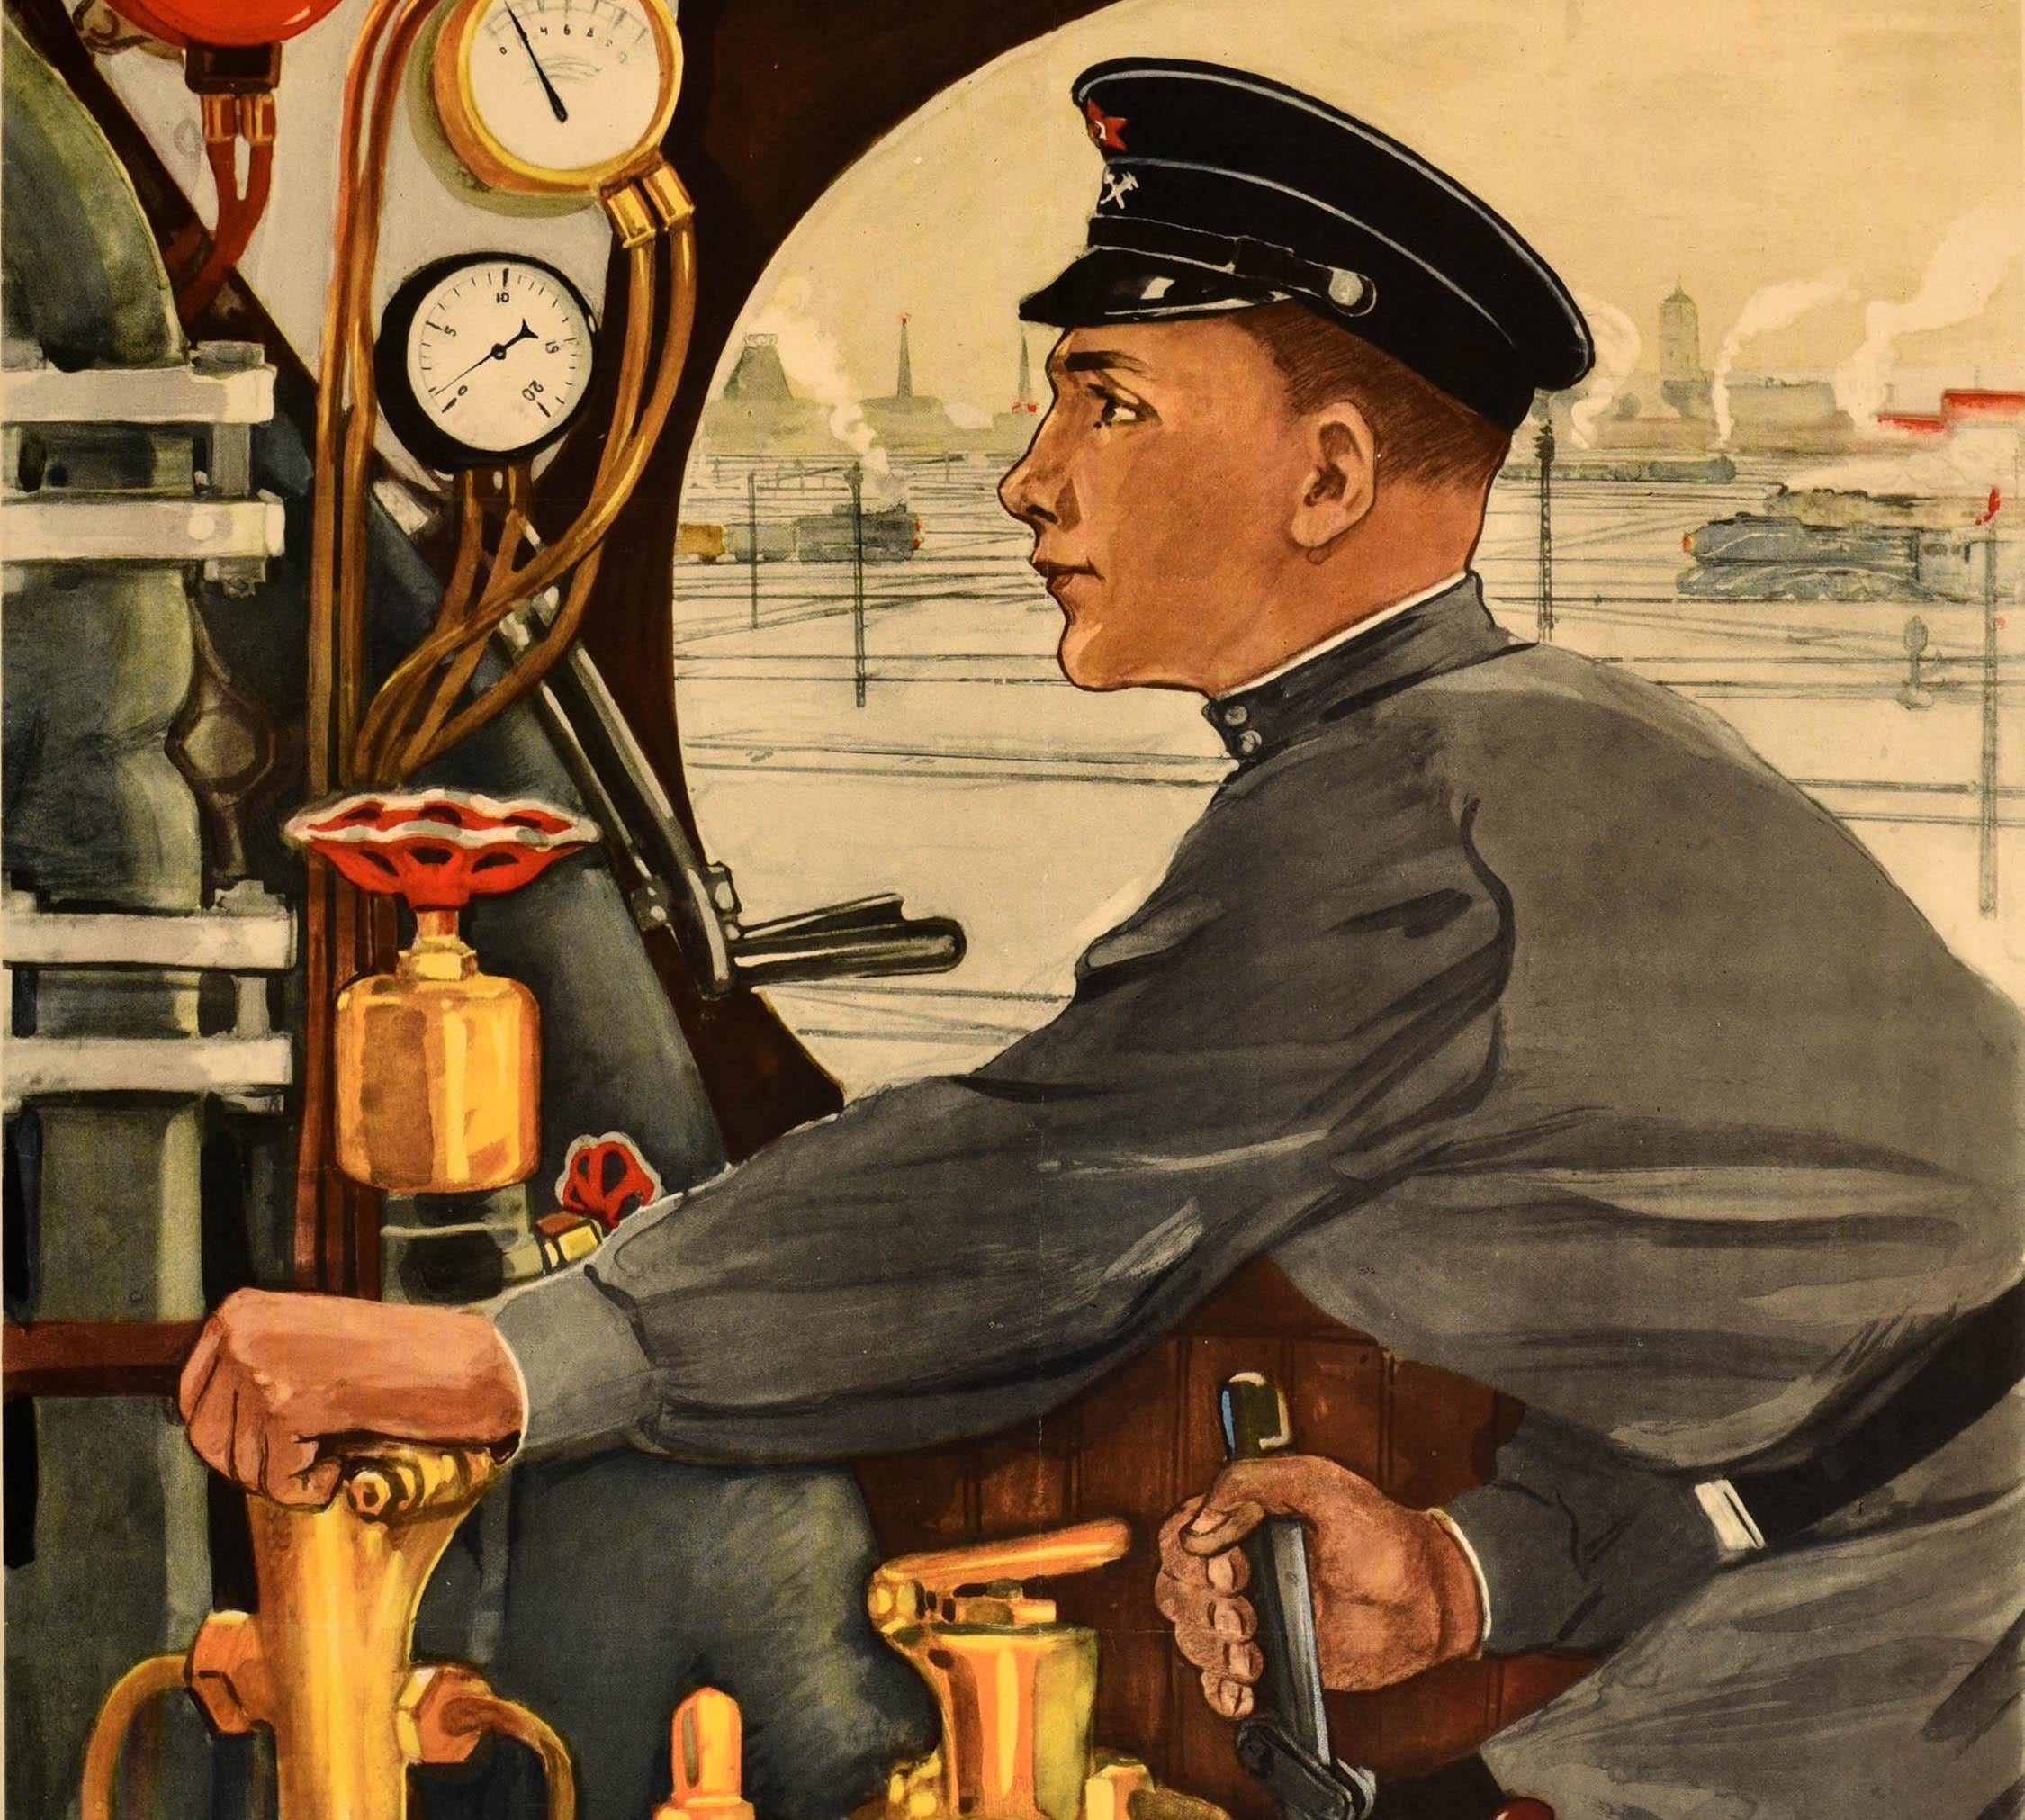 Original vintage Soviet propaganda poster - I will be a train driver! / ???? ??????????! Great artwork of a young train driver in uniform operating the controls with a view towards more trains on railway lines and a city in the distance. Good